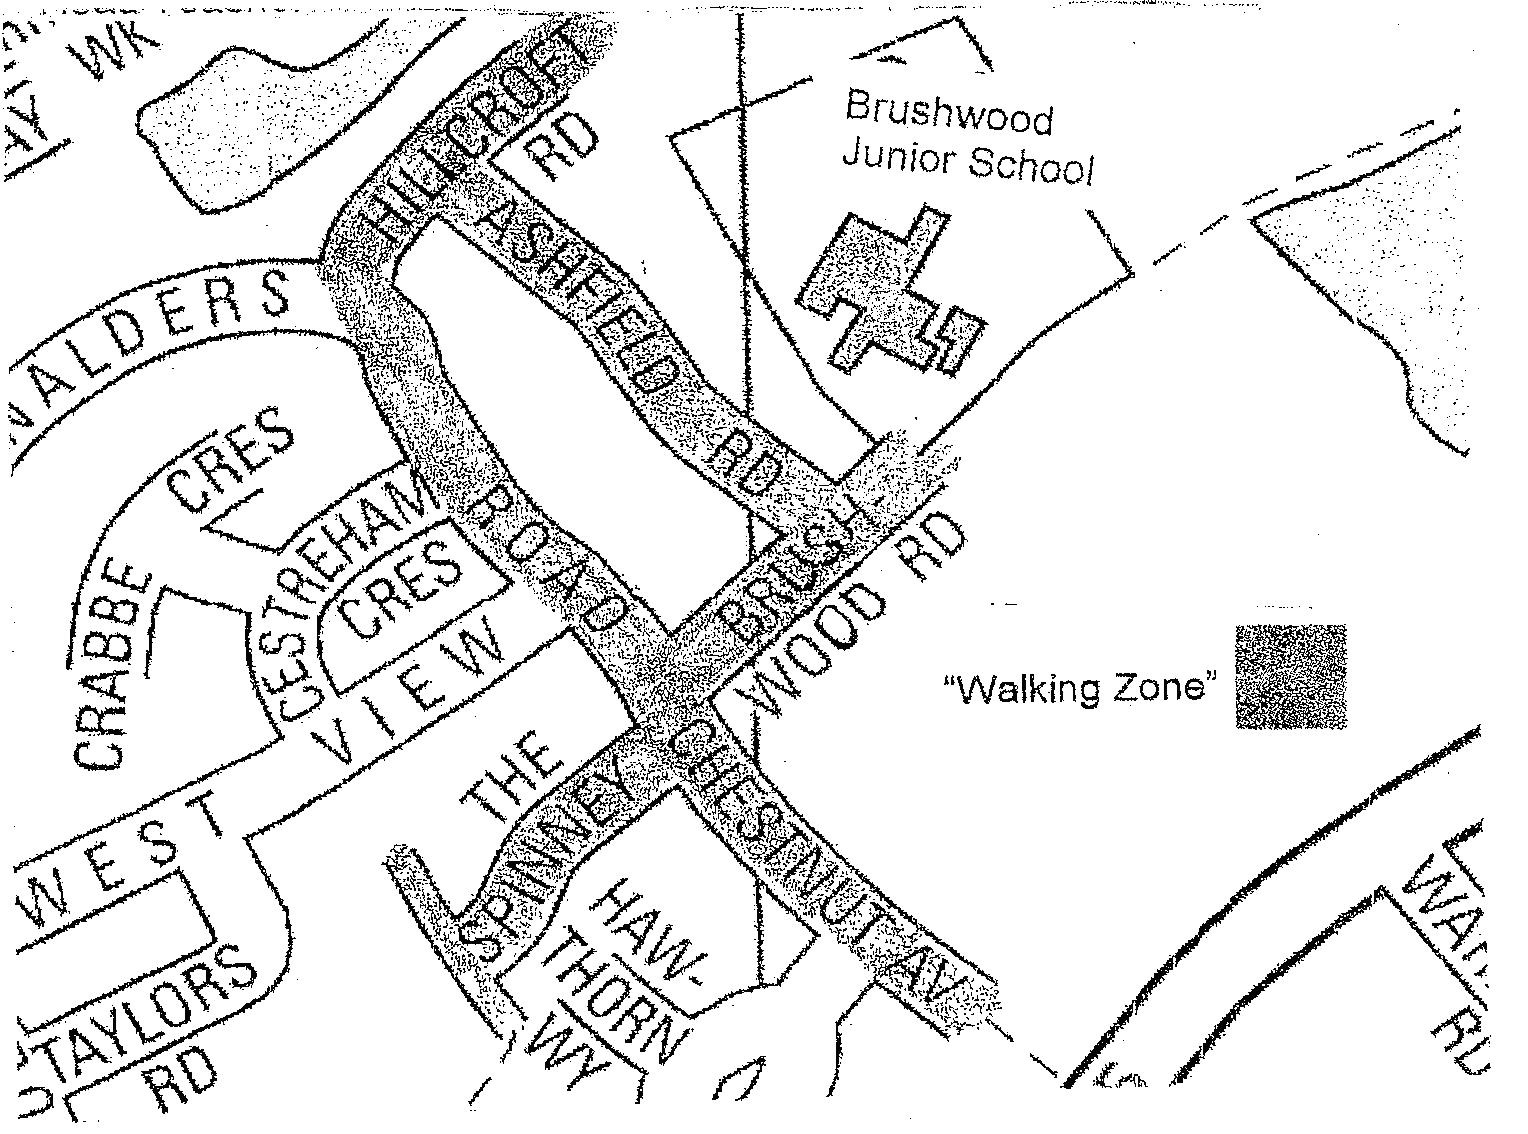 Voluntary Exclusion Zone Map showing the walking zone consisting of the 'pan handle' formed by Brushwood Road, Hillcroft Road, Ashfield Road, Nalders Road and Chestnut Avenue